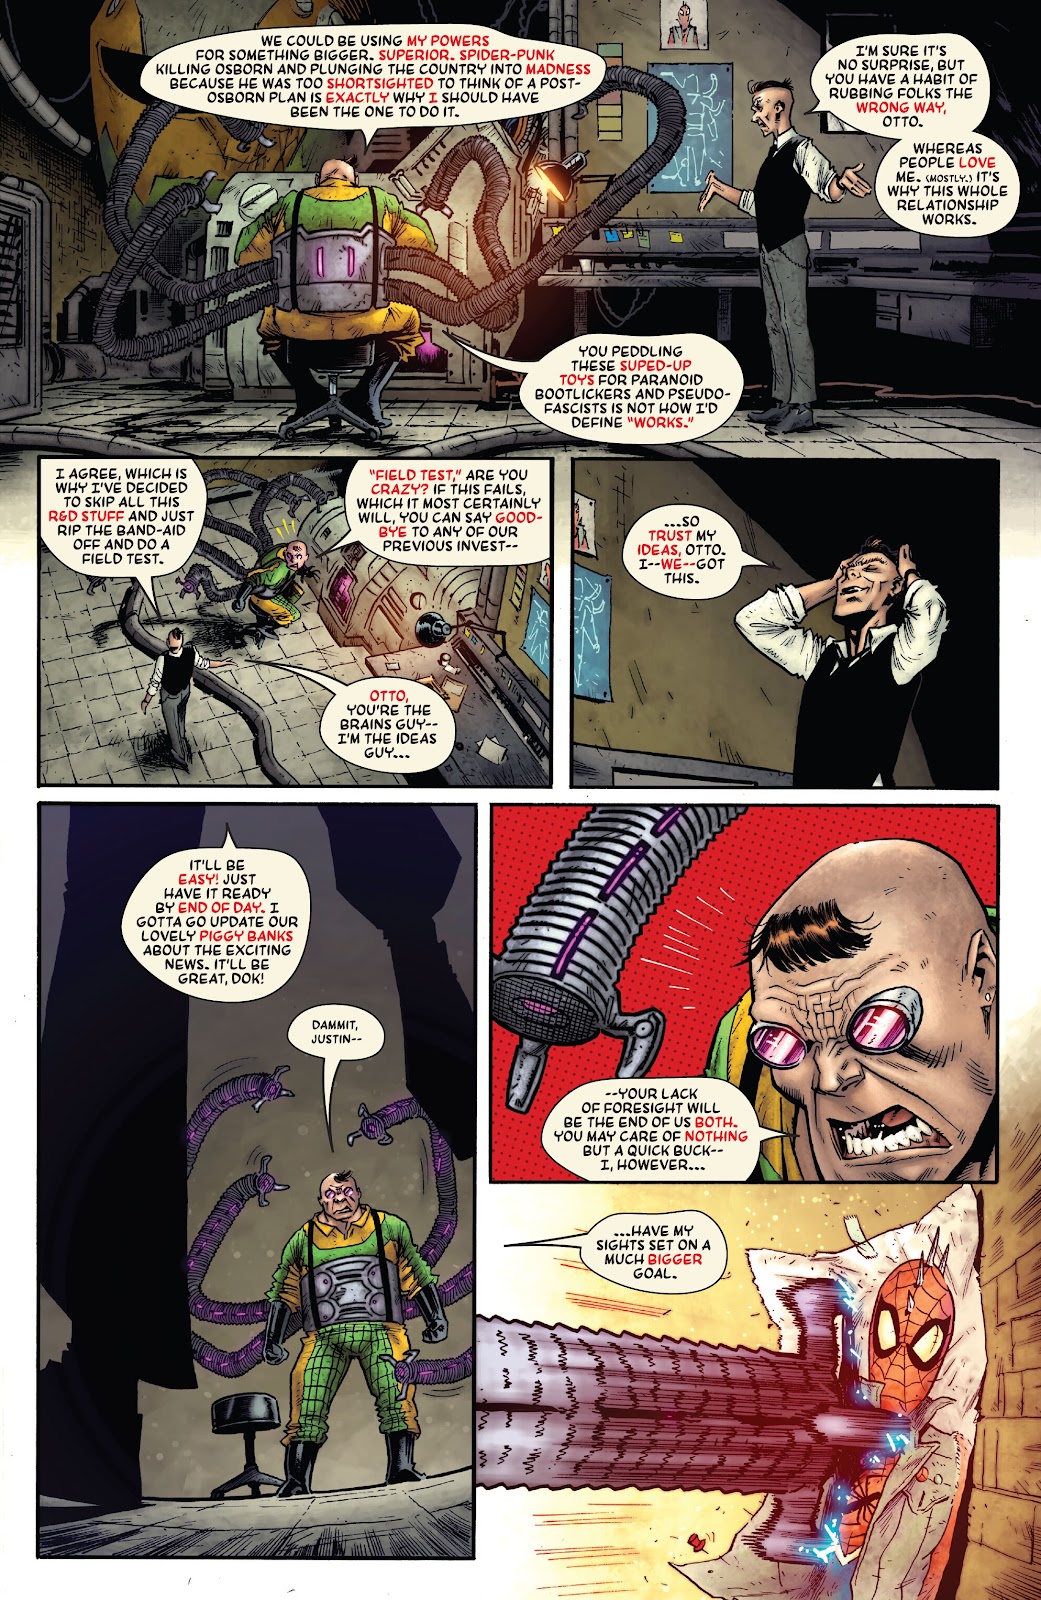 Spider-Punk: Arms Race issue 1 - Page 12